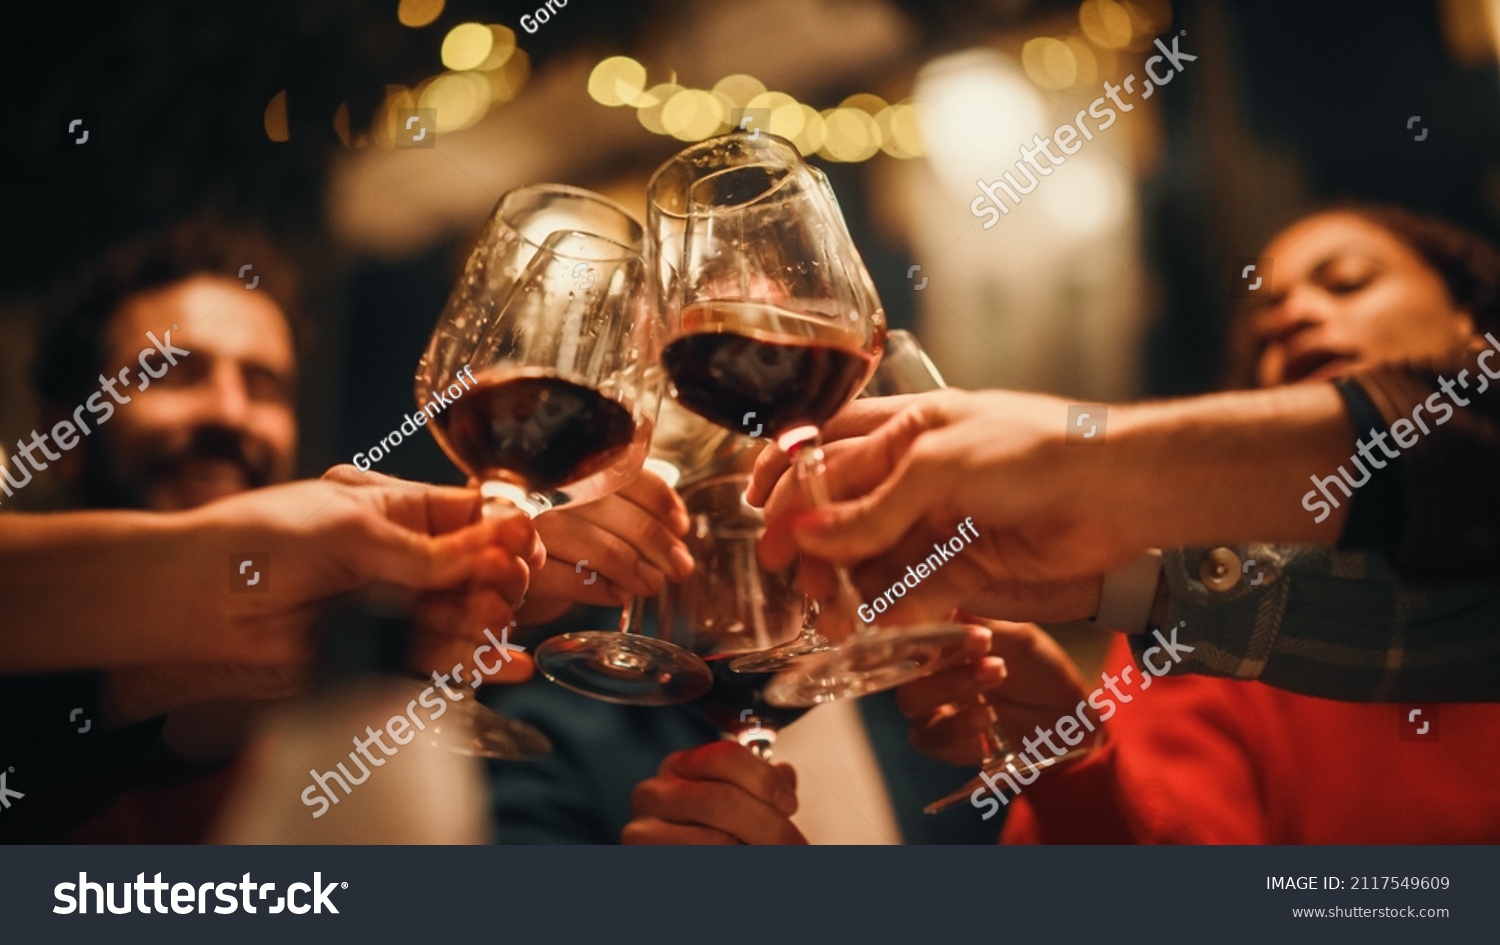 Close Up Shot of People Cheers, Making Toasts and Touch with Wine and Champagne Glasses at a Garden Party Celebration with Friends on a Warm Summer Evening. Beautiful People Enjoy Life on a Weekend. #2117549609